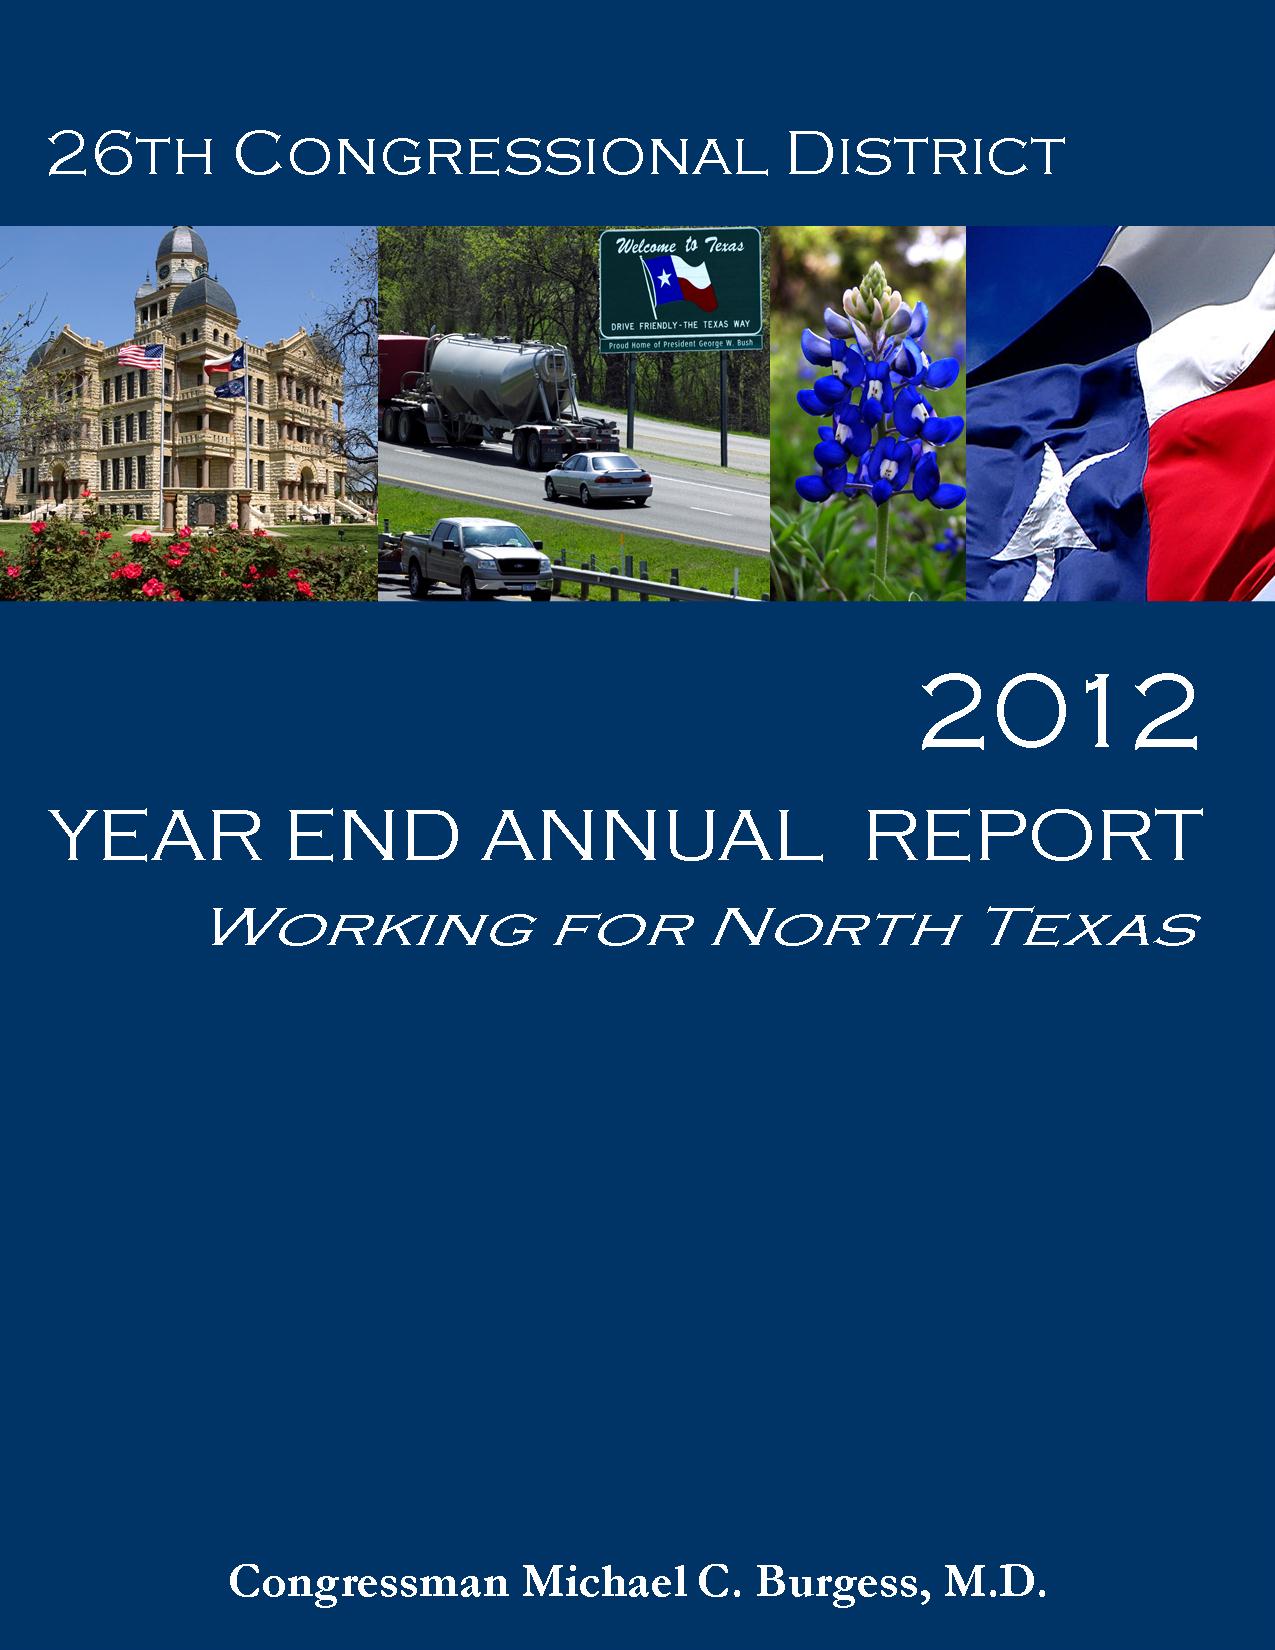 http://burgess.house.gov/uploadedfiles/2012_year_end_annual_report_image.jpg